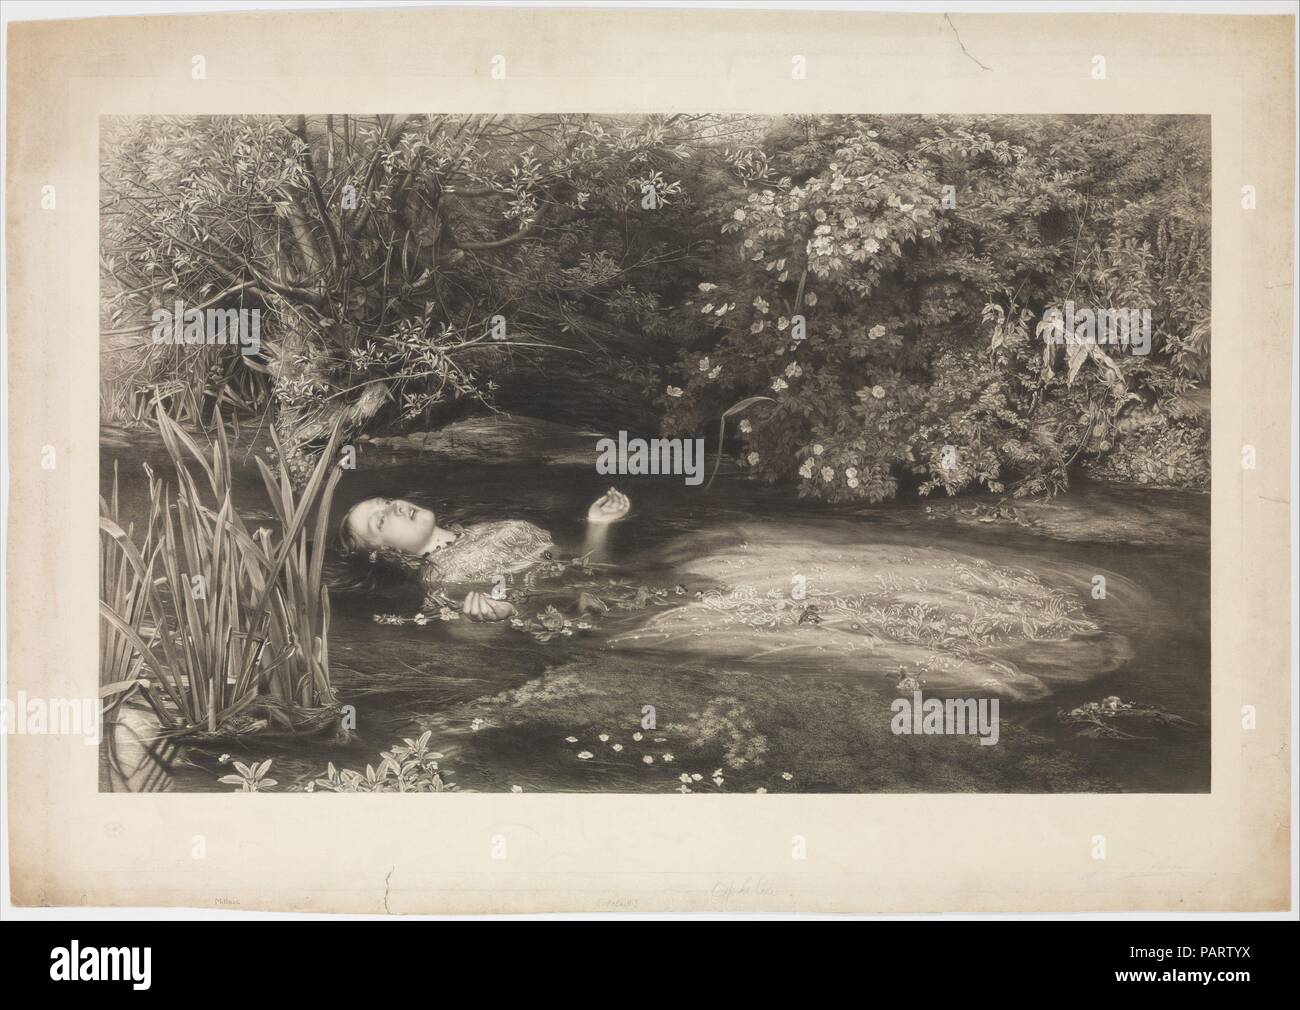 Ophelia (Shakespeare, Hamlet, Act 4, Scene 7). Artist: After Sir John Everett Millais (British, Southampton 1829-1896 London). Dimensions: Image: 20 11/16 in. × 34 in. (52.5 × 86.3 cm)  Plate: 25 7/16 × 37 1/16 in. (64.6 × 94.2 cm)  Sheet: 27 3/8 x 39 3/16 in. (69.5 x 99.5 cm)  Chine collé: 24 5/16 × 35 13/16 in. (61.7 × 90.9 cm). Engraver: James Stephenson (British, Manchester 1808-1886 London). Publisher: Henry Graves & Company (London). Subject: William Shakespeare (British, Stratford-upon-Avon 1564-1616 Stratford-upon-Avon). Date: March 1, 1866.  Here, Hamlet's rejected lover, her mind unh Stock Photo